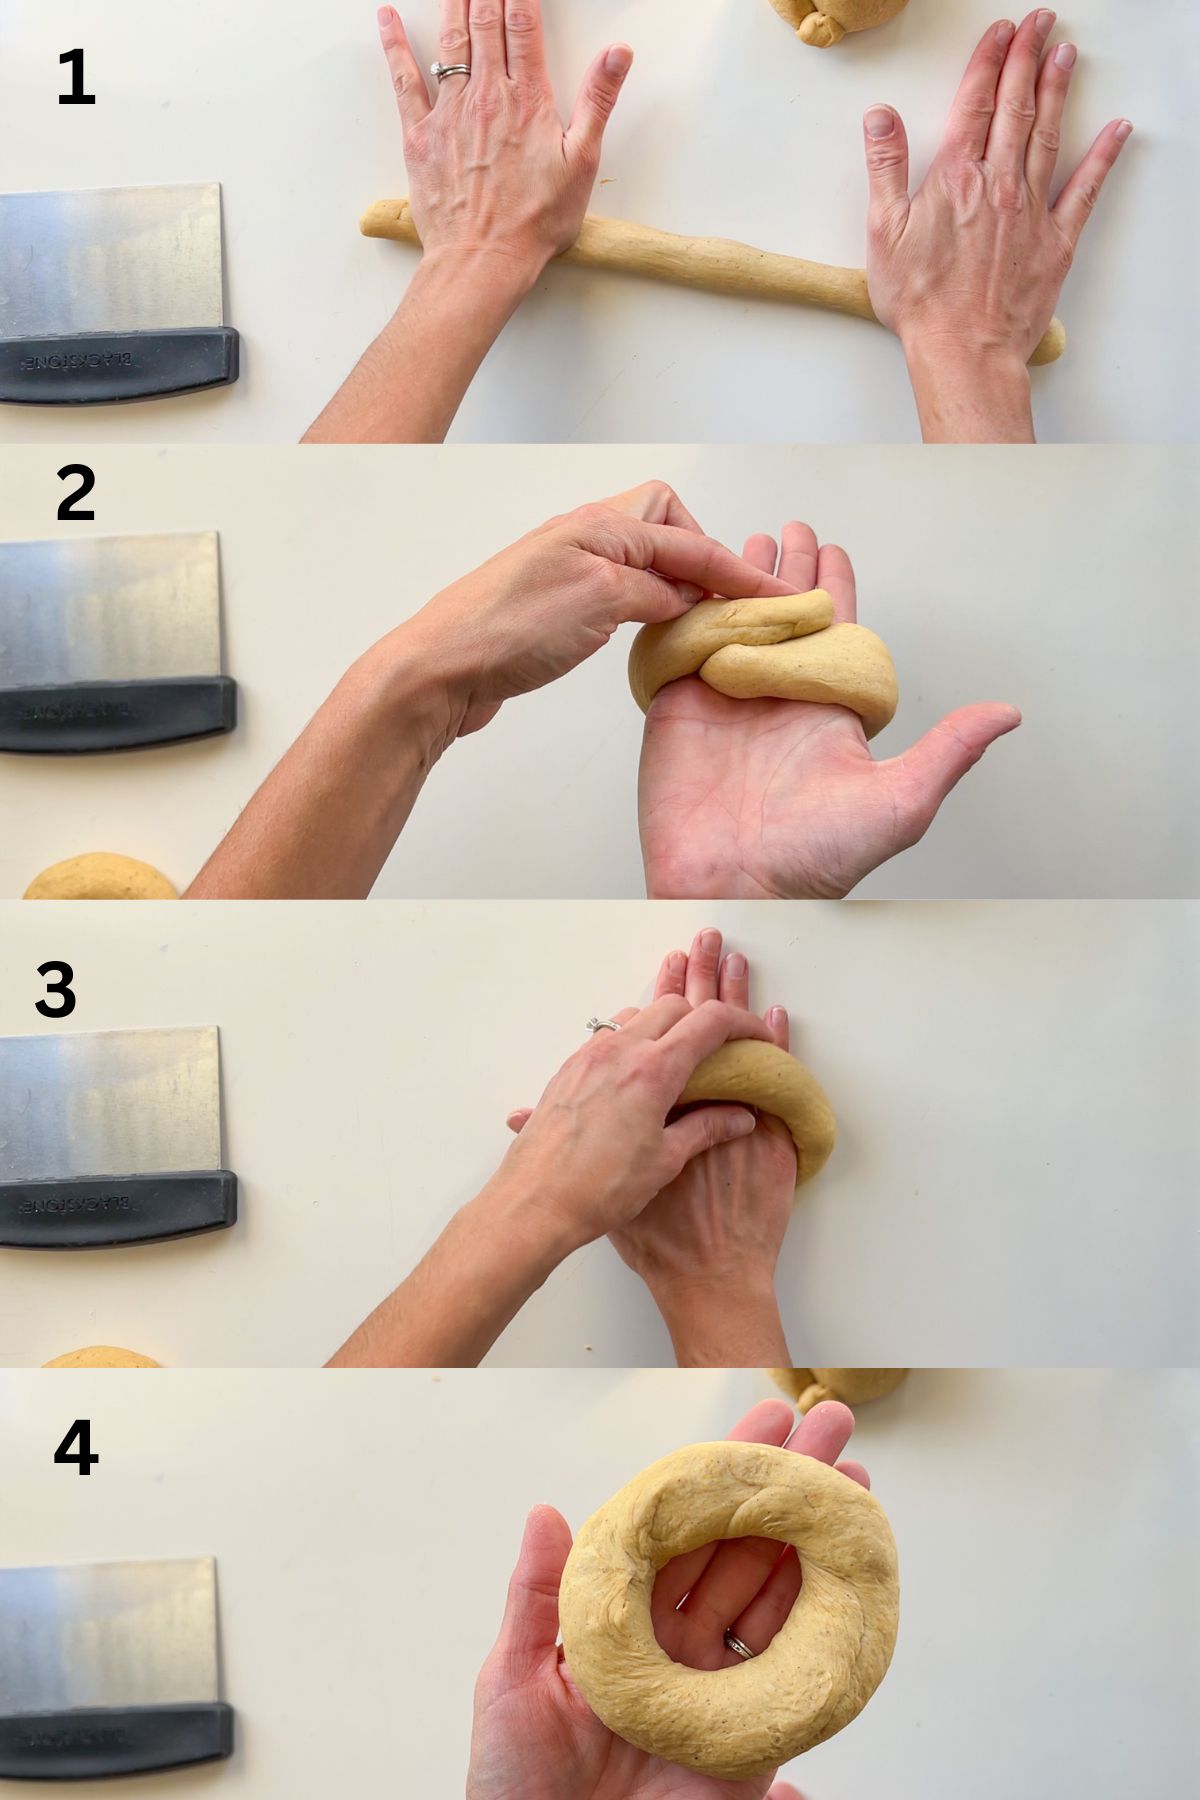 Two hands rolling dough into a long snake-like piece, wrapping it around the hand, and rubbing the two ends together to seal the bagel shape.